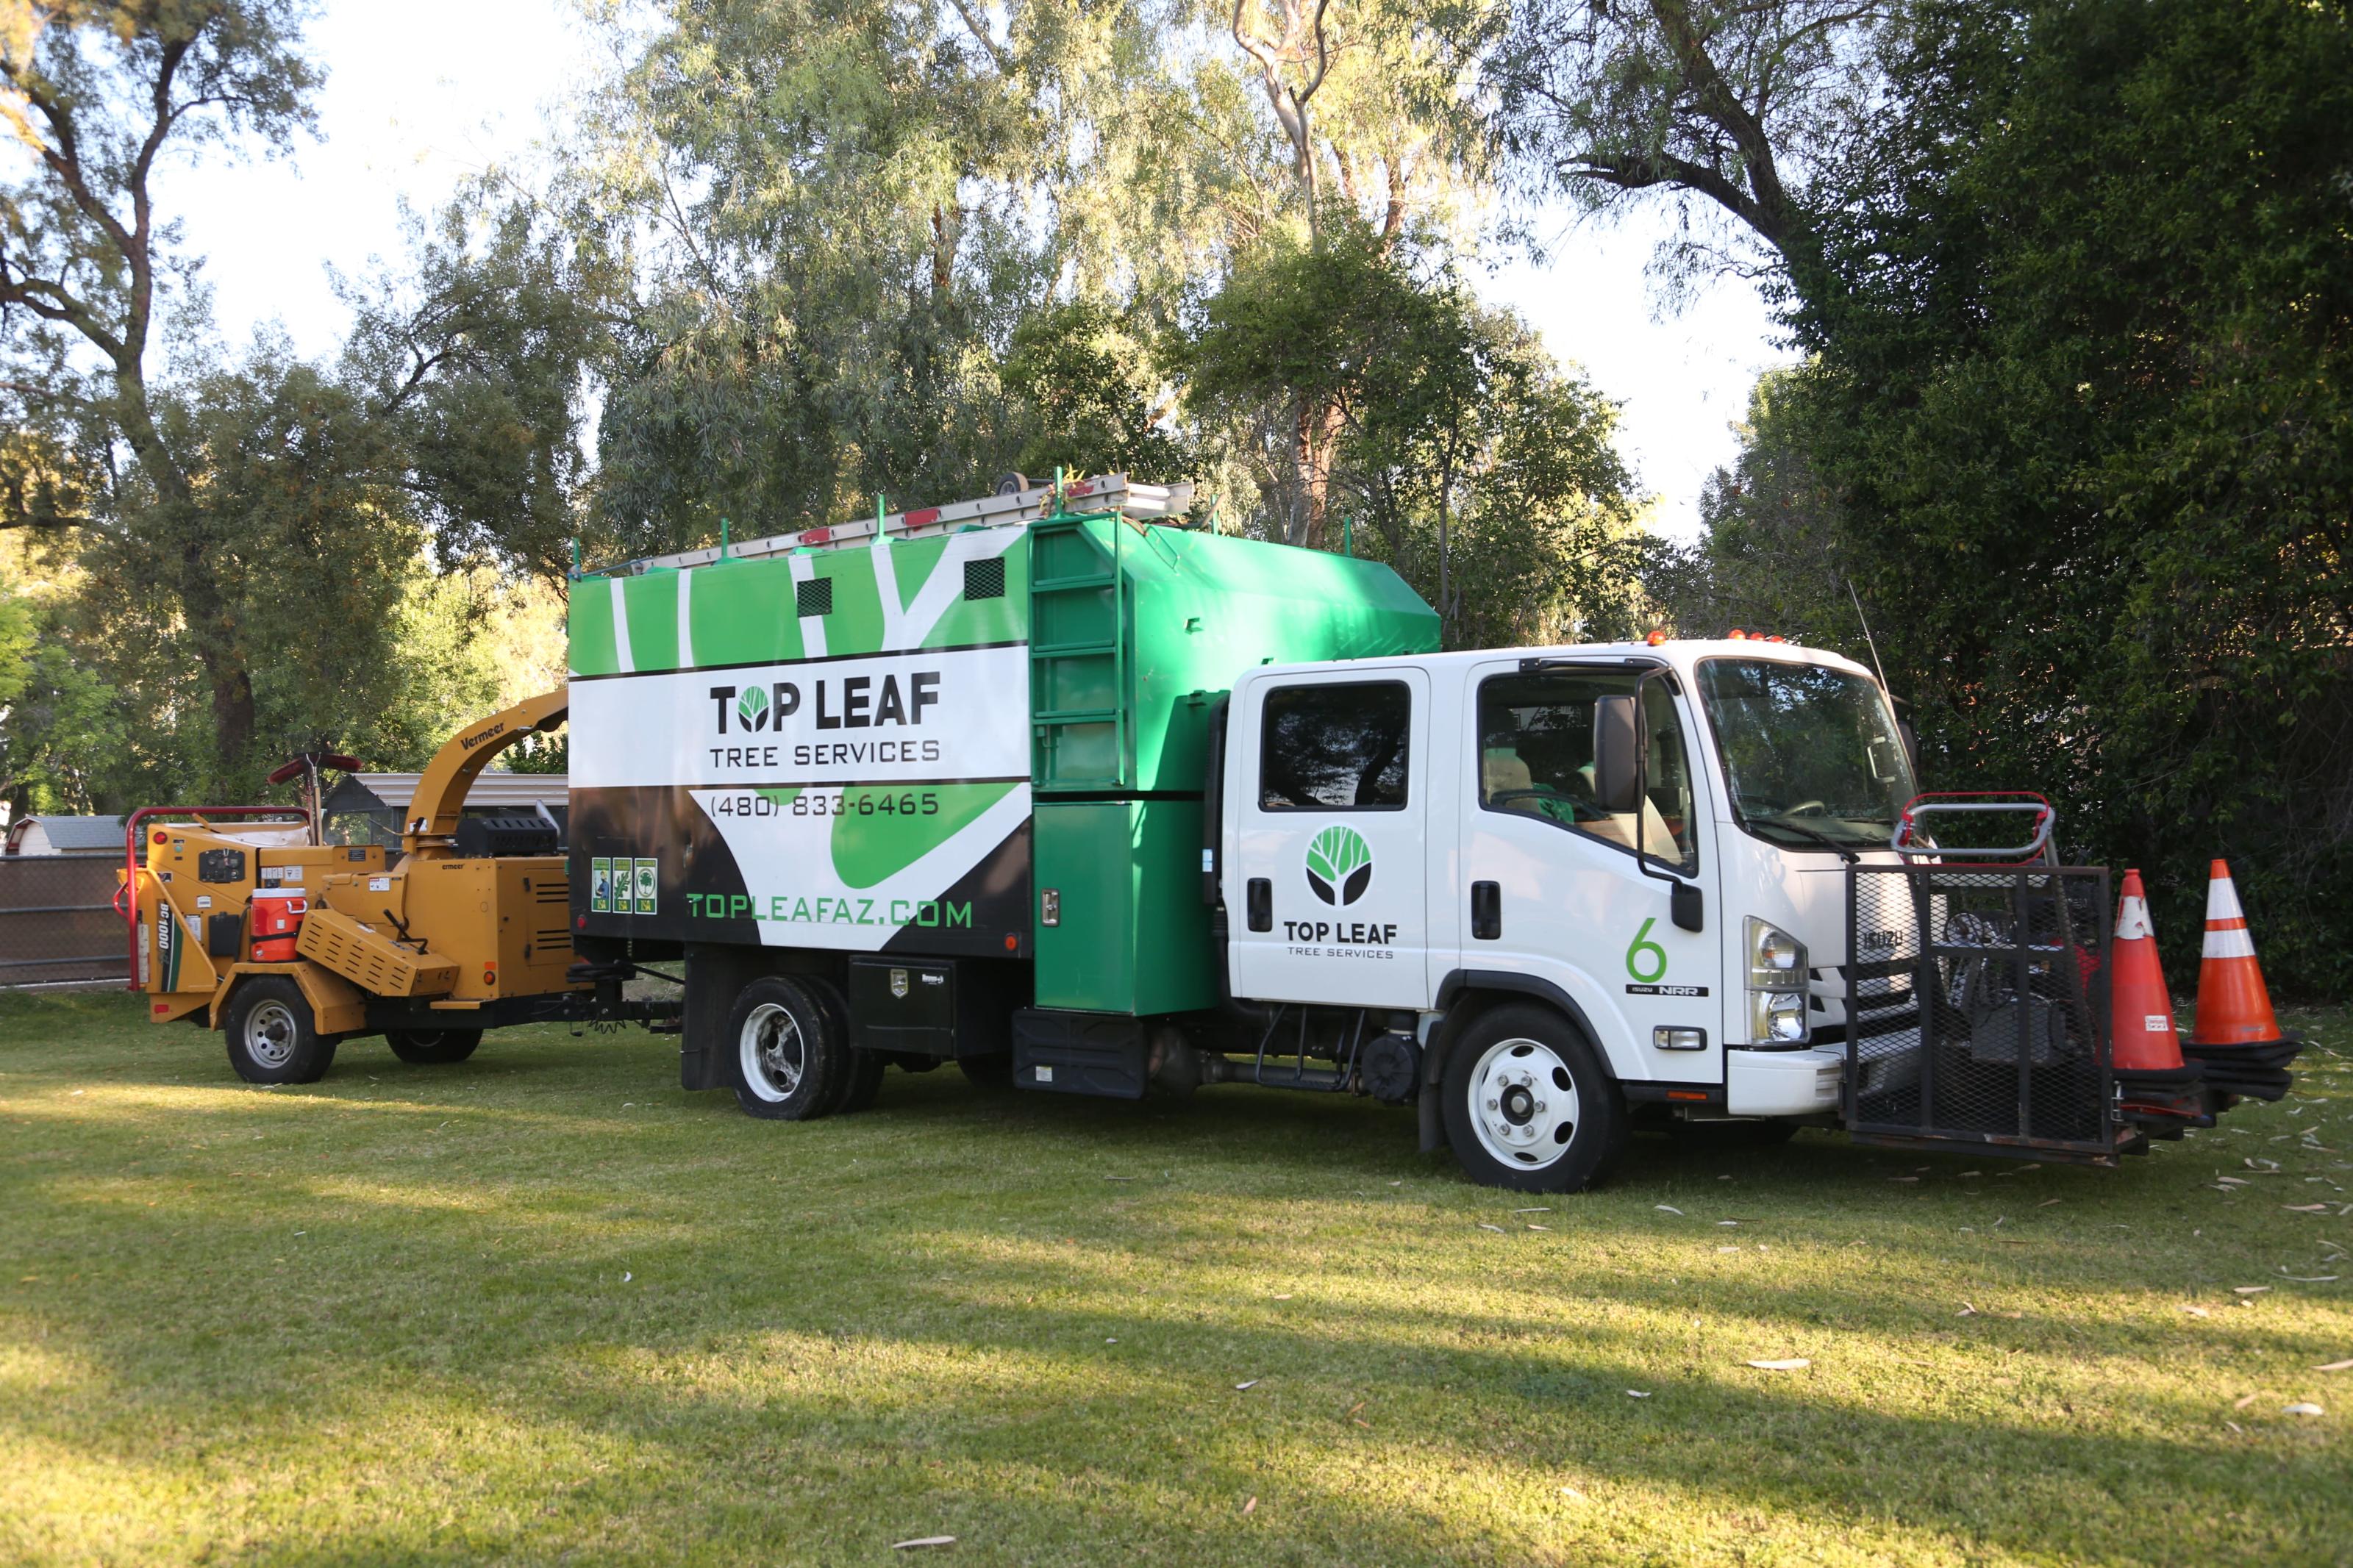 Top Leaf Tree Service Keep Your Trees in Top Shape